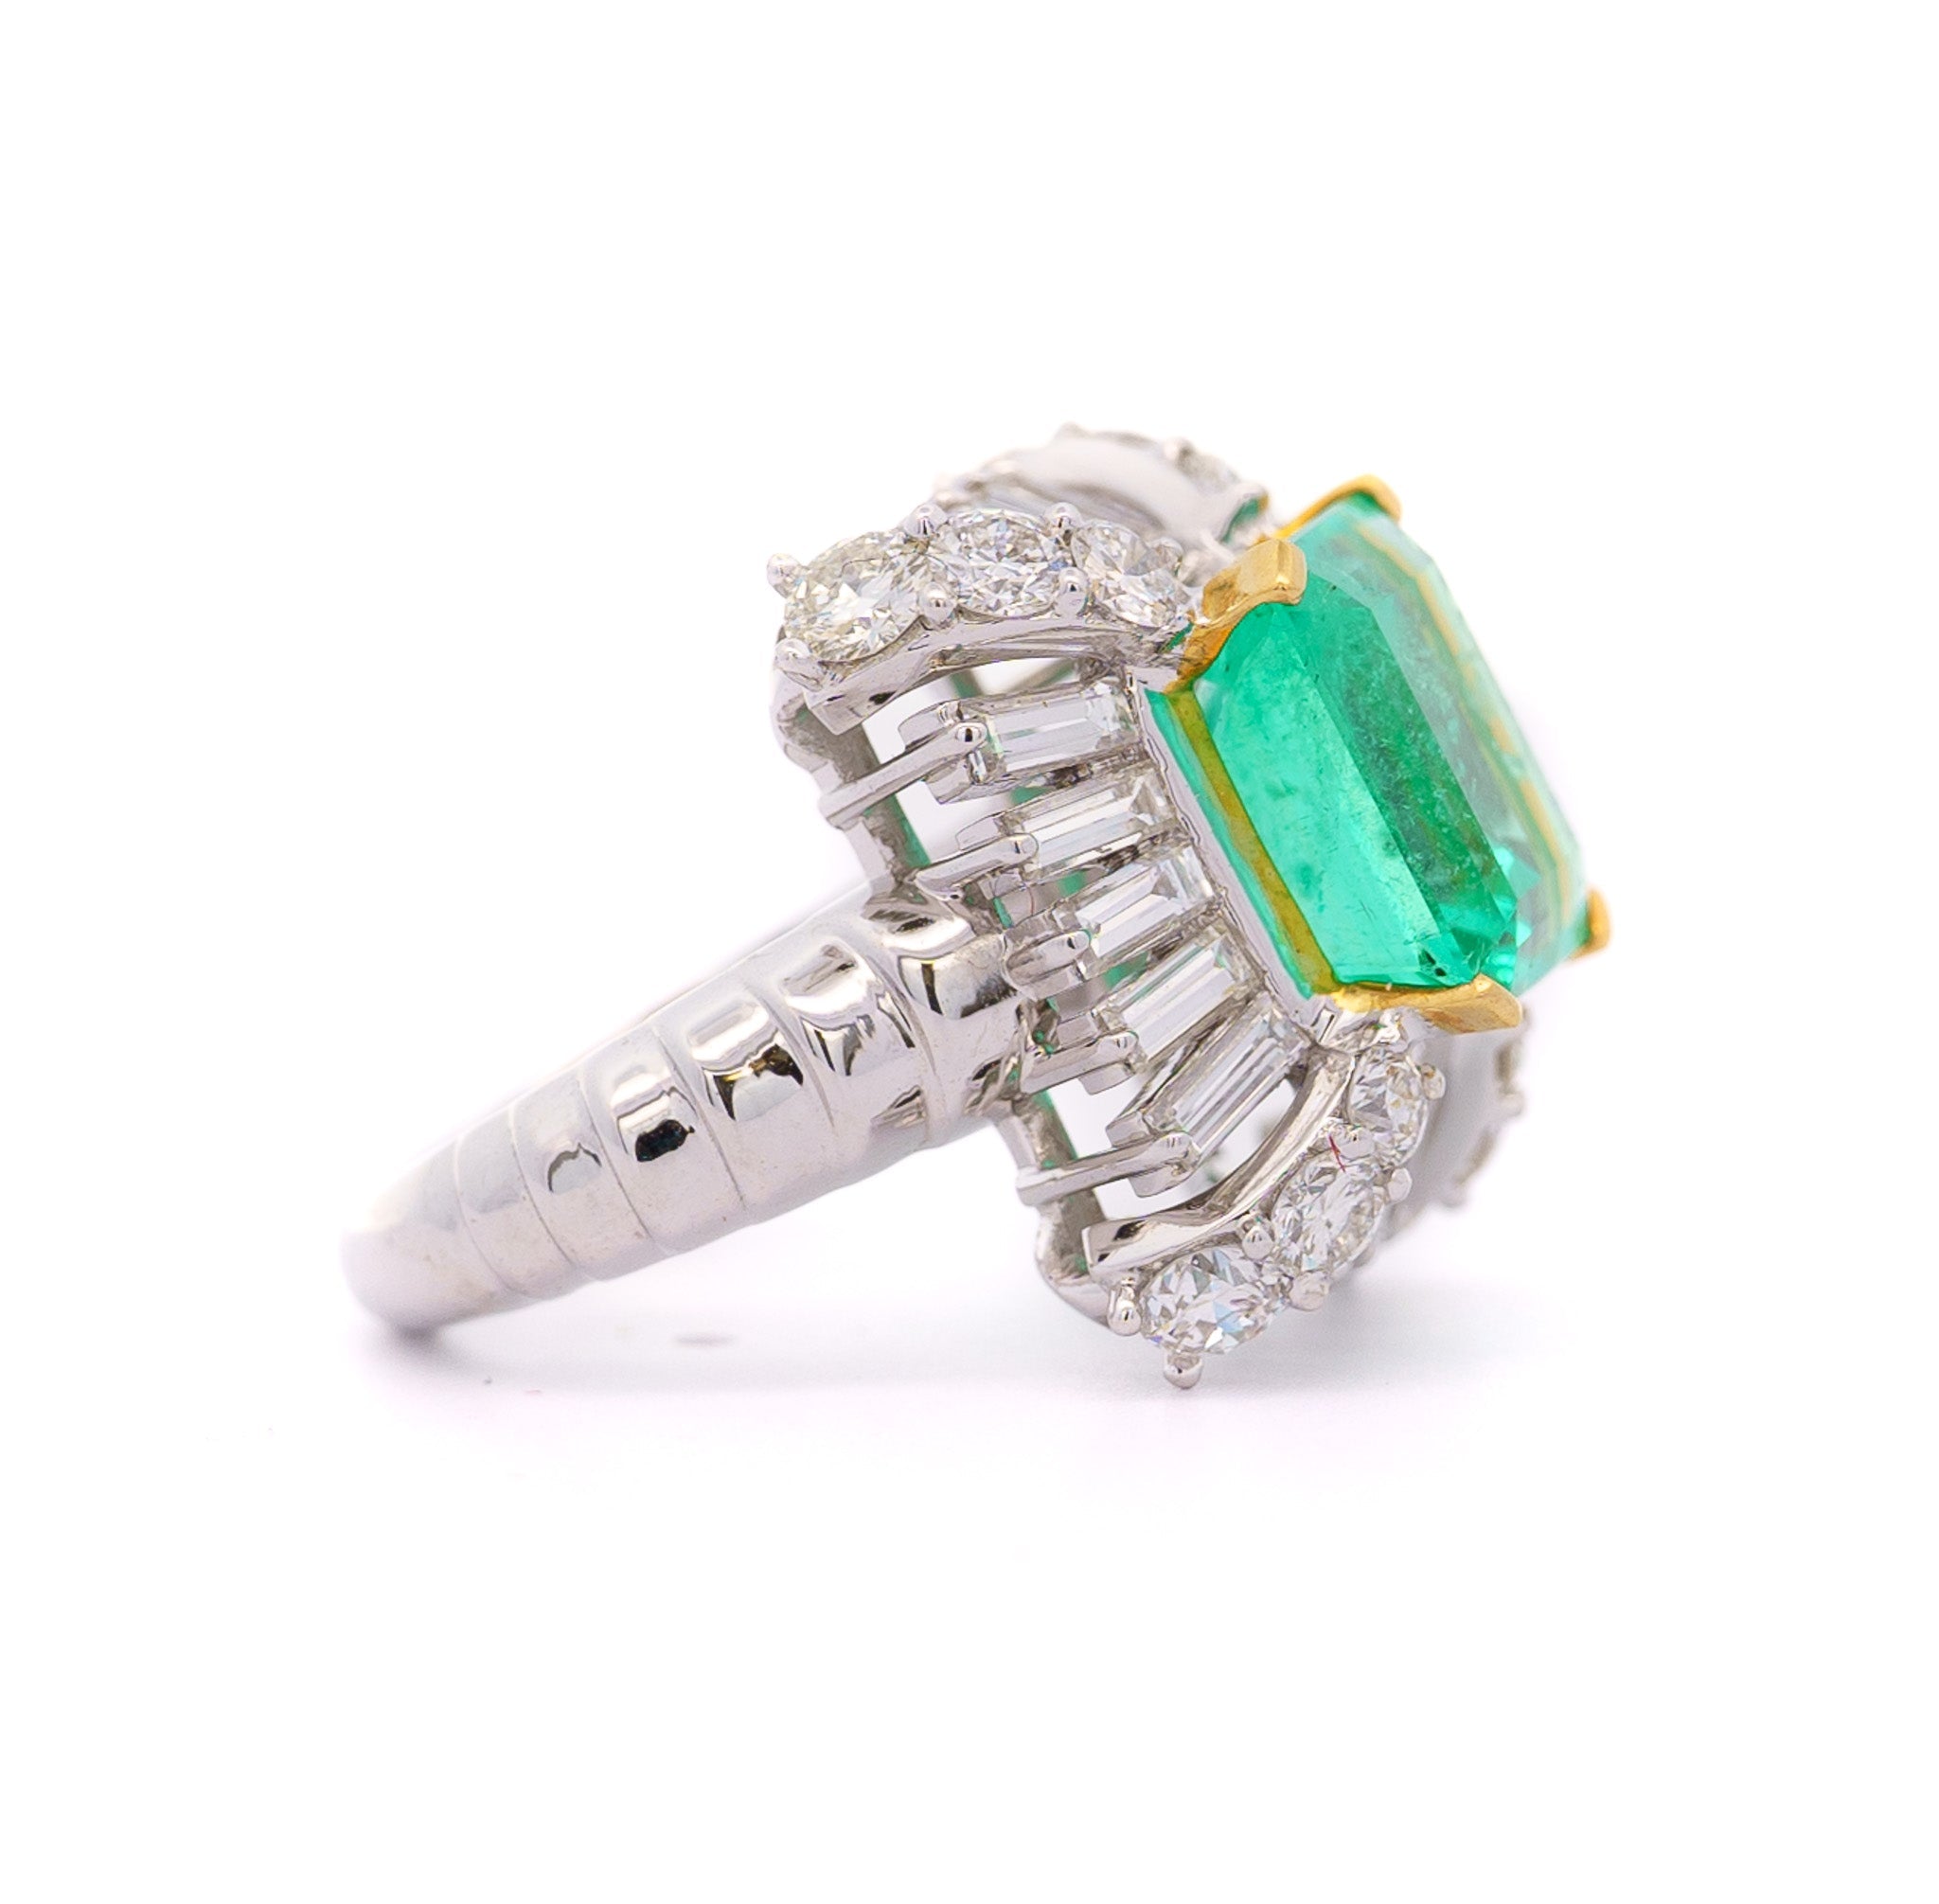 GRS Certified 6.78 carat Colombian Emerald and Baguette Cut Diamond Ring